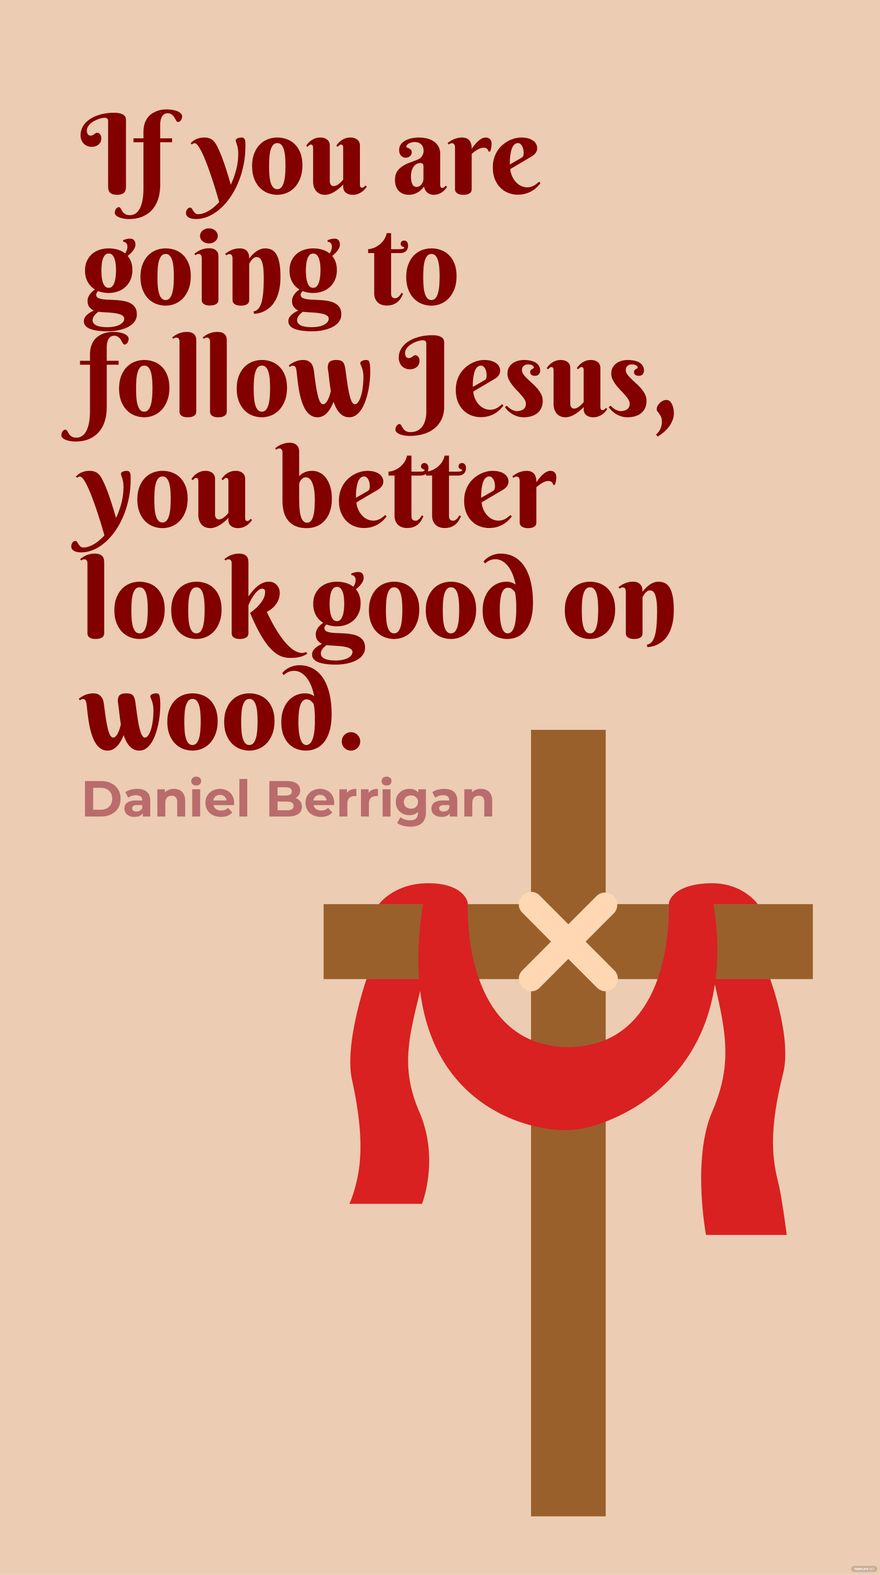 Daniel Berrigan - If you are going to follow Jesus, you better look good on wood. in JPG